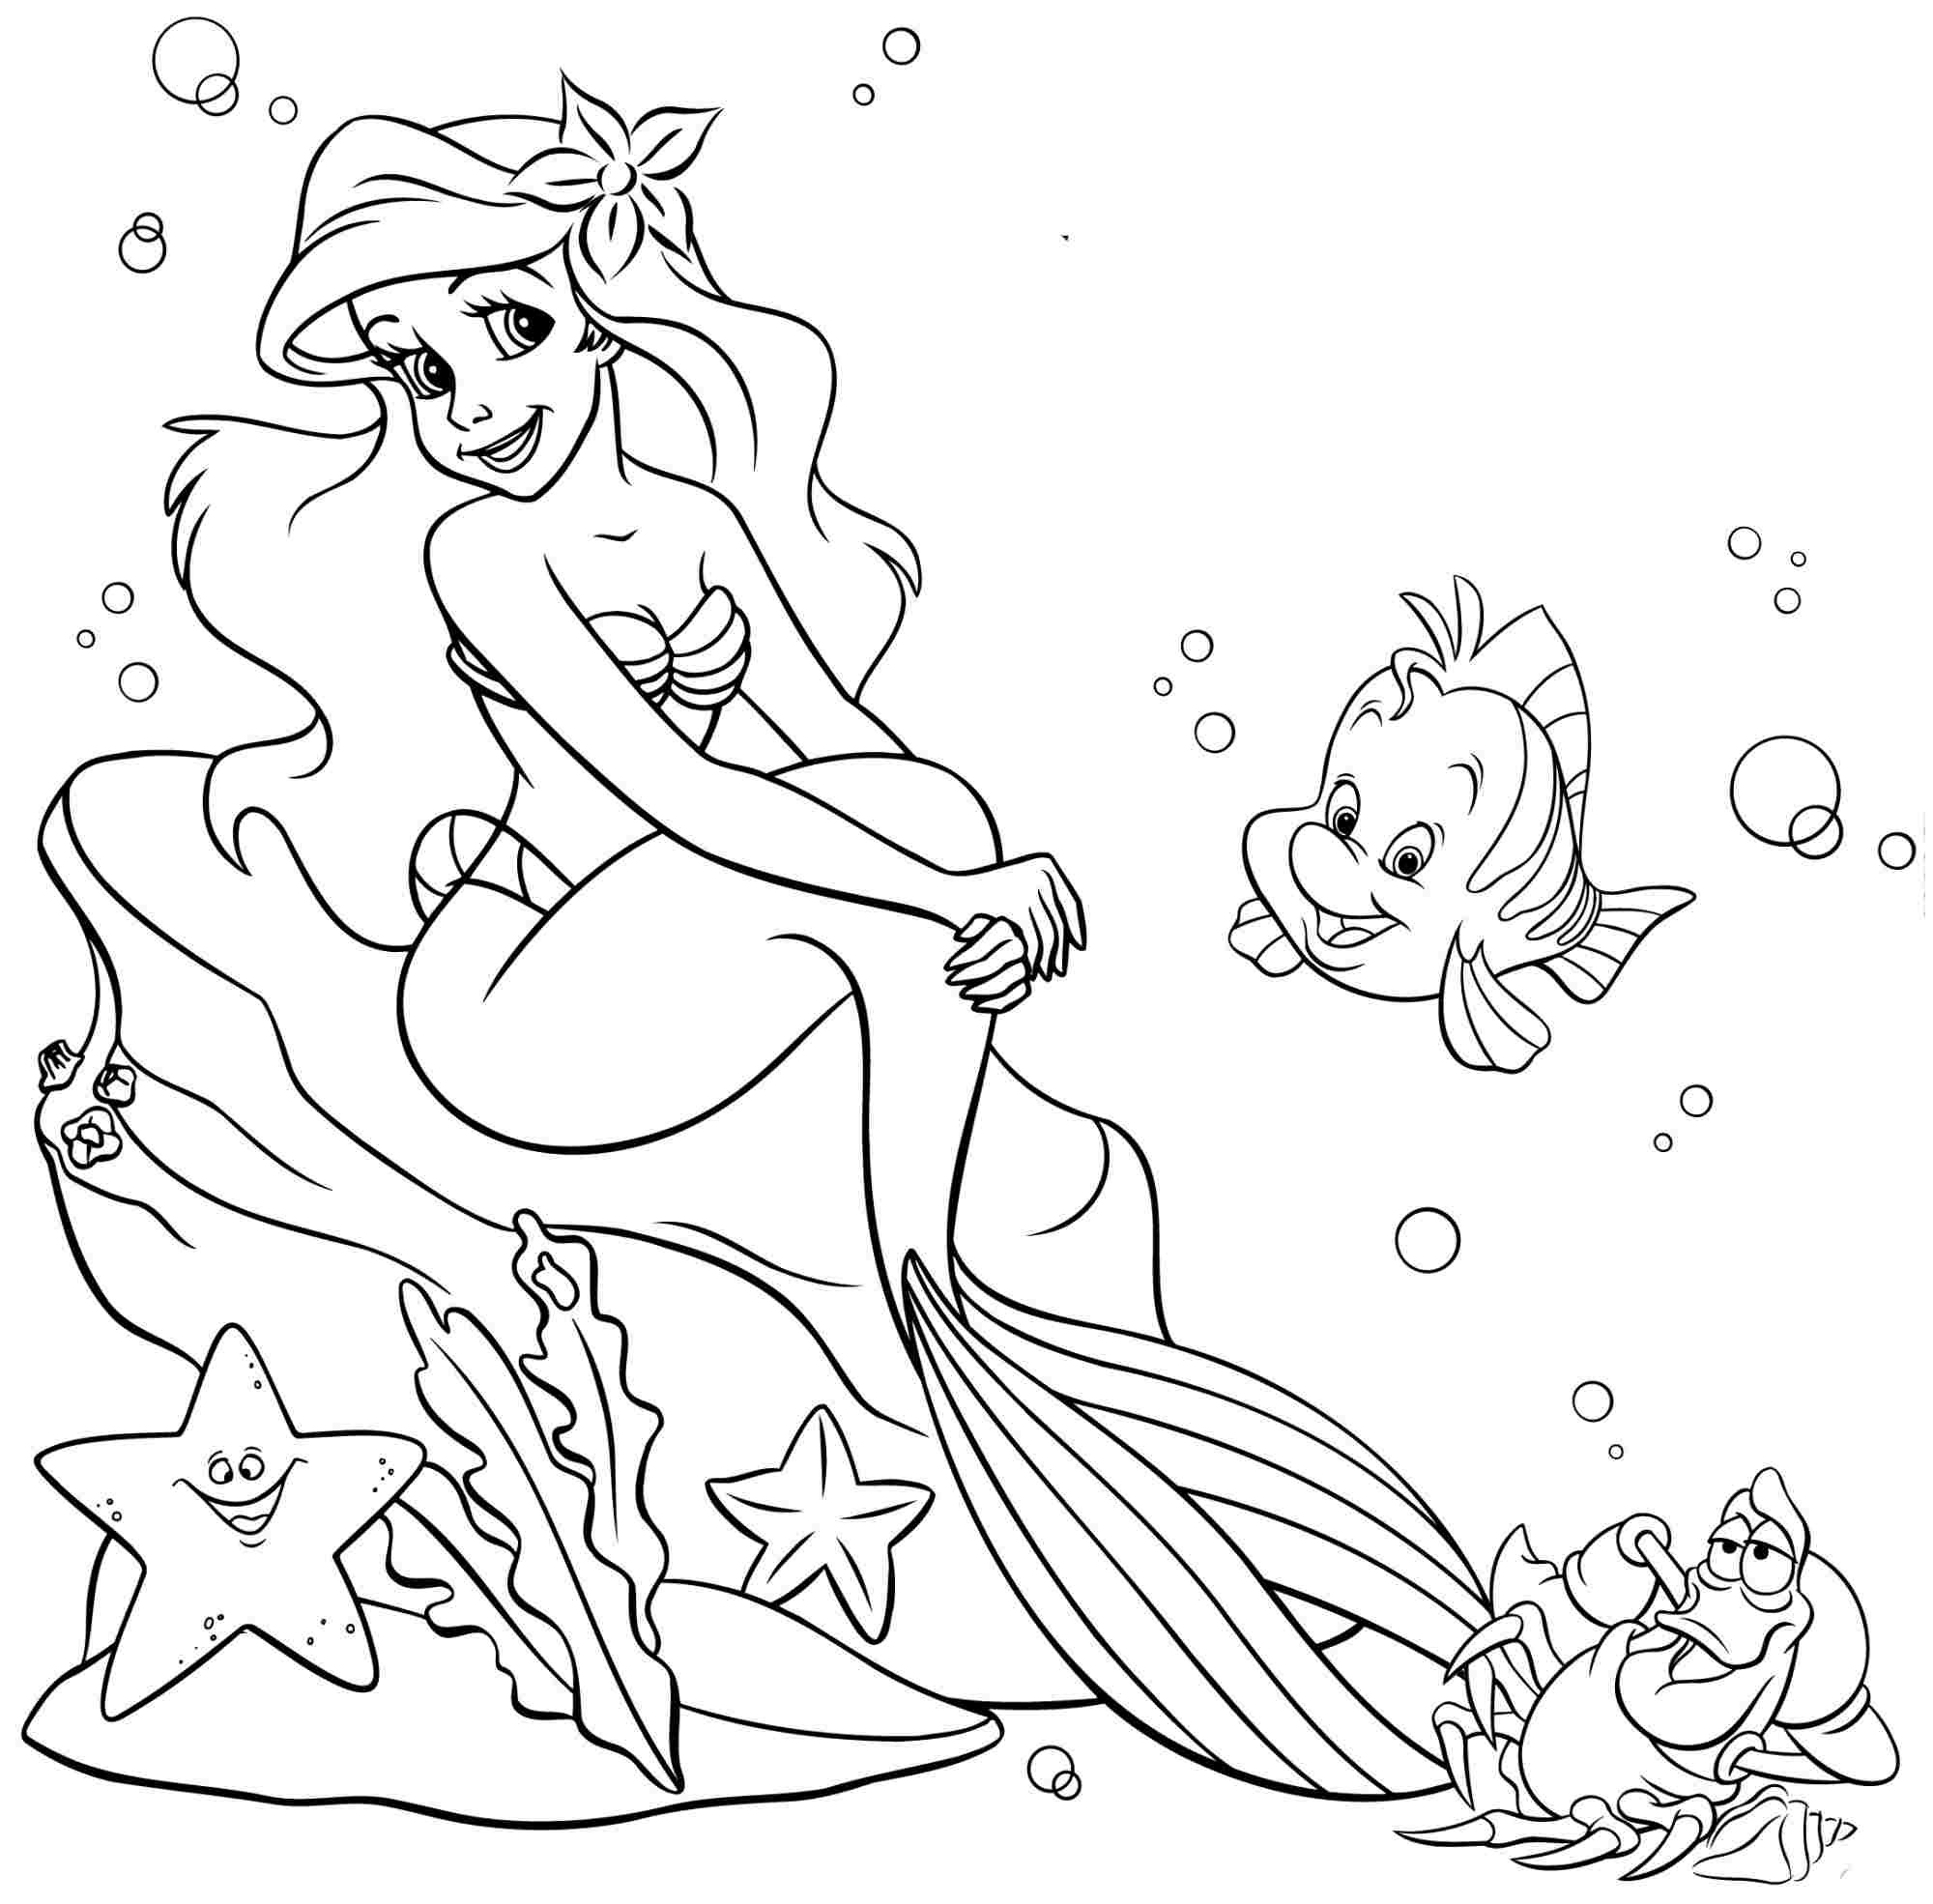 Disney Coloring Pages Ariel 12 with Disney Coloring Pages Ariel